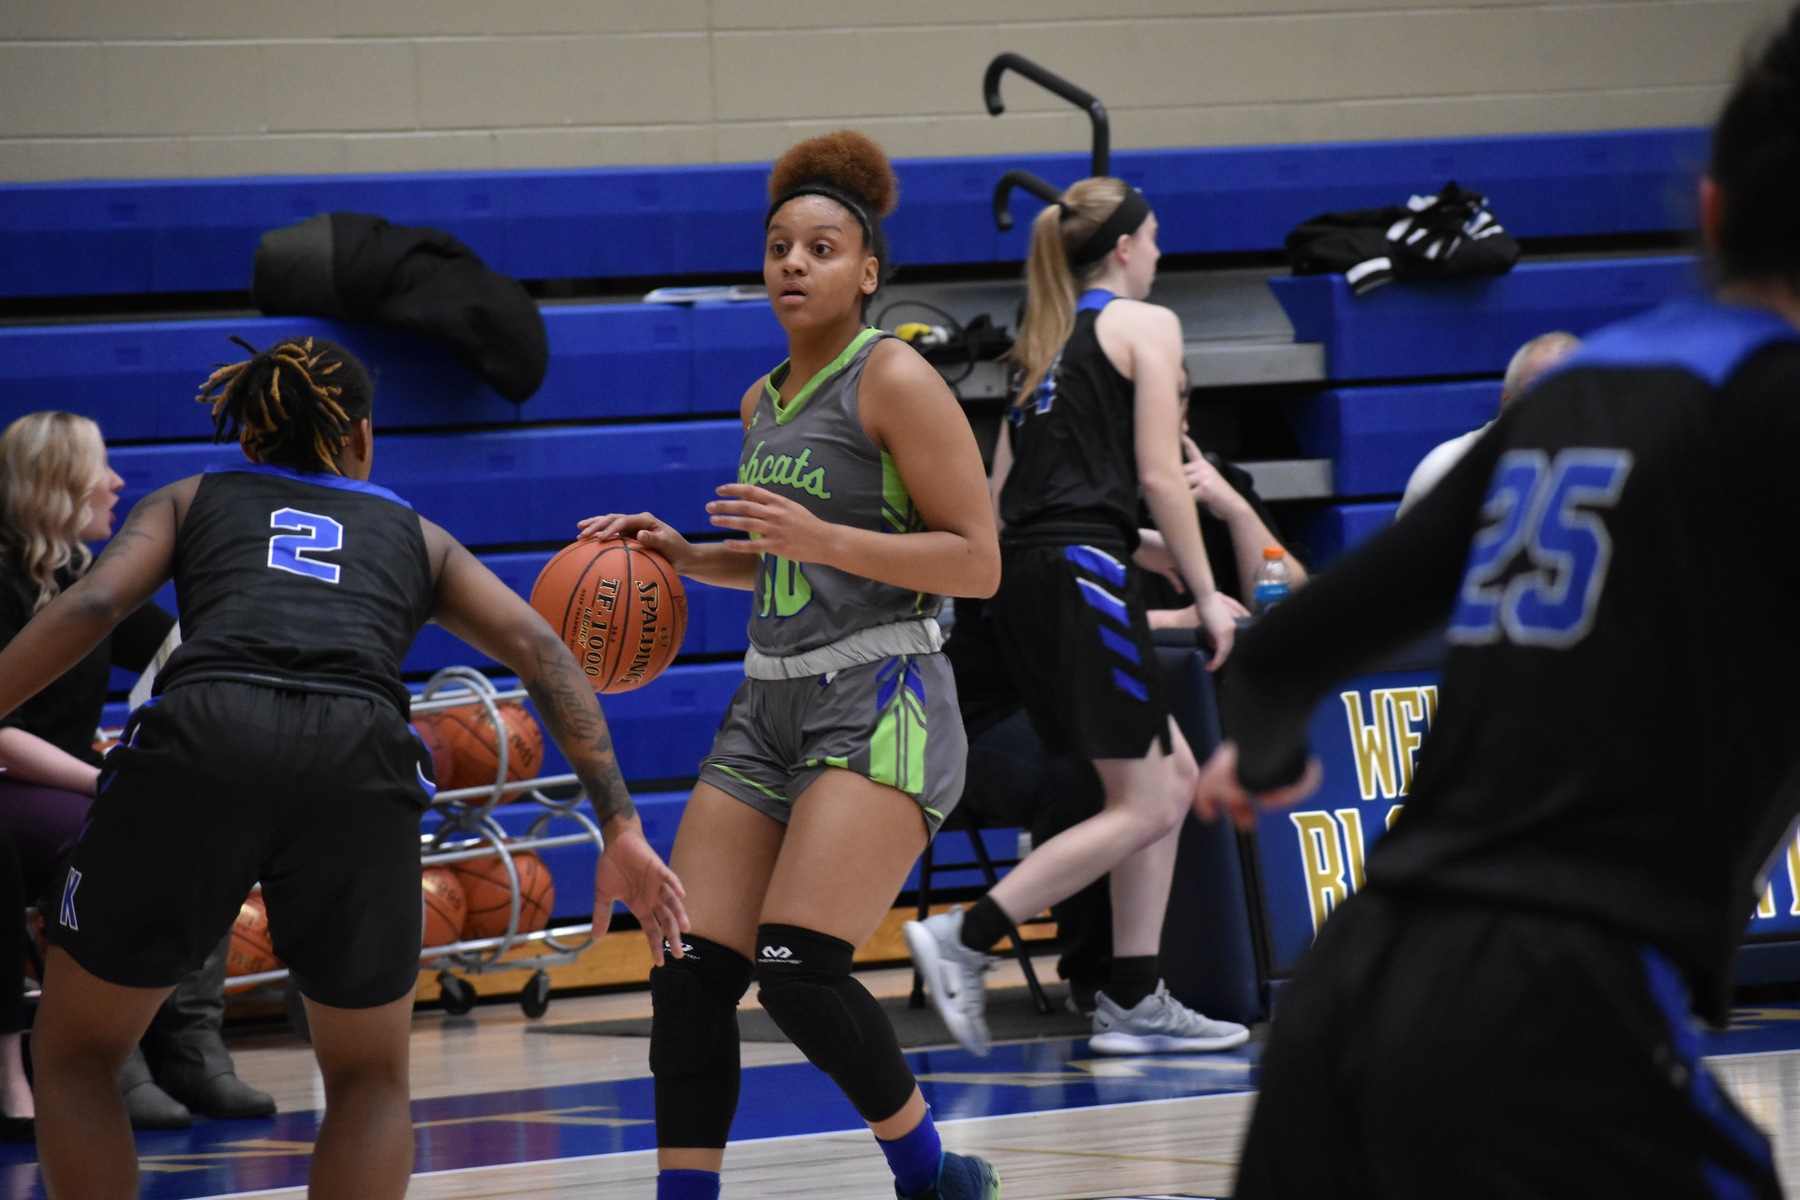 La’Janique Perry-Ellis has been named to the women’s DII NJCAA Basketball 2019-20 All-American Second